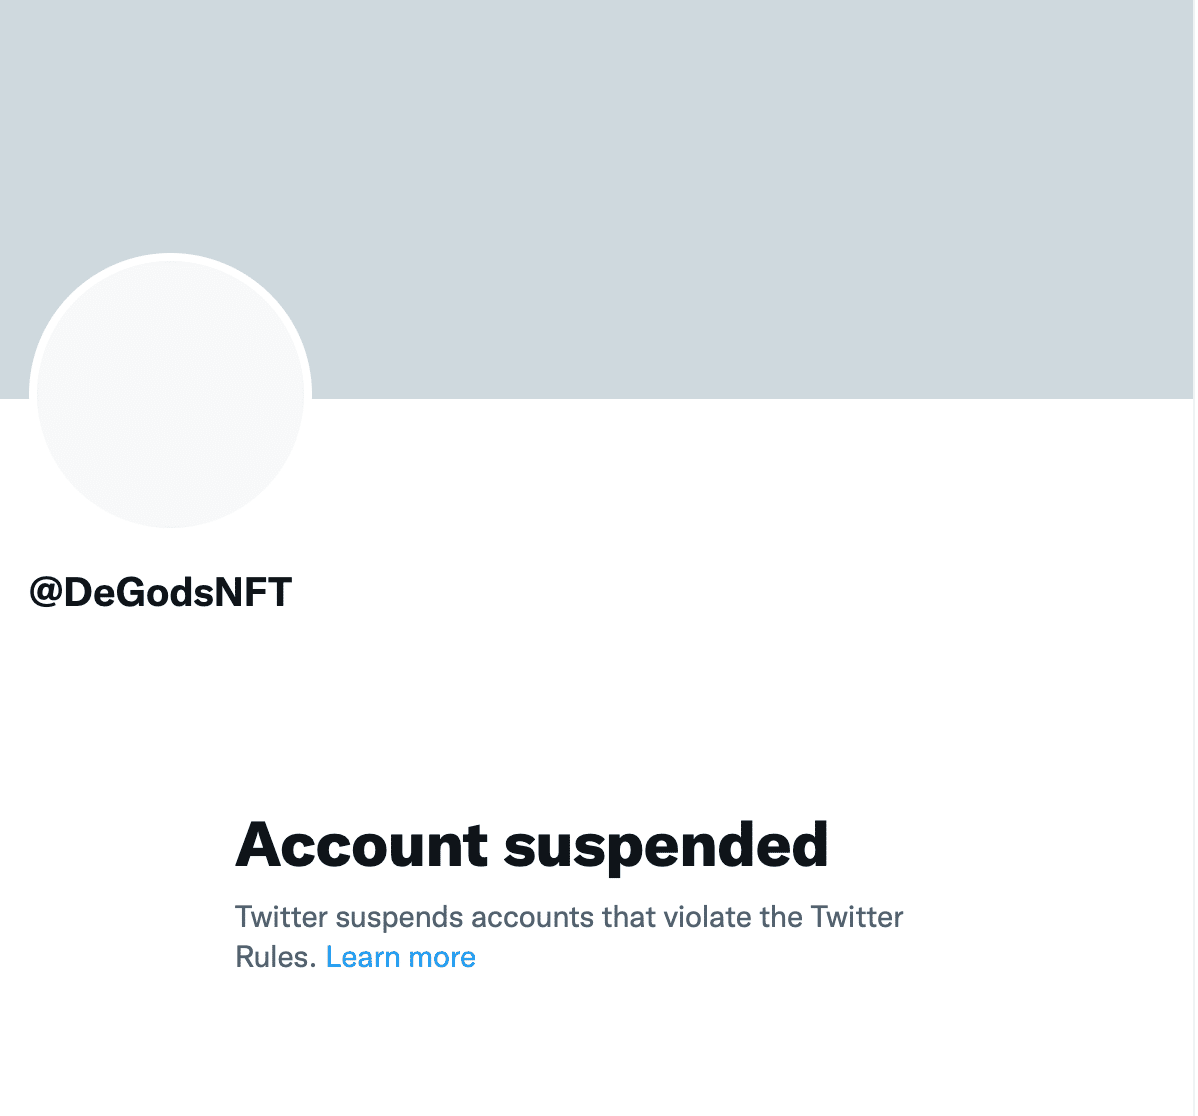 DeGods, Y00ts and NFT Team Twitter Accounts Suspended!